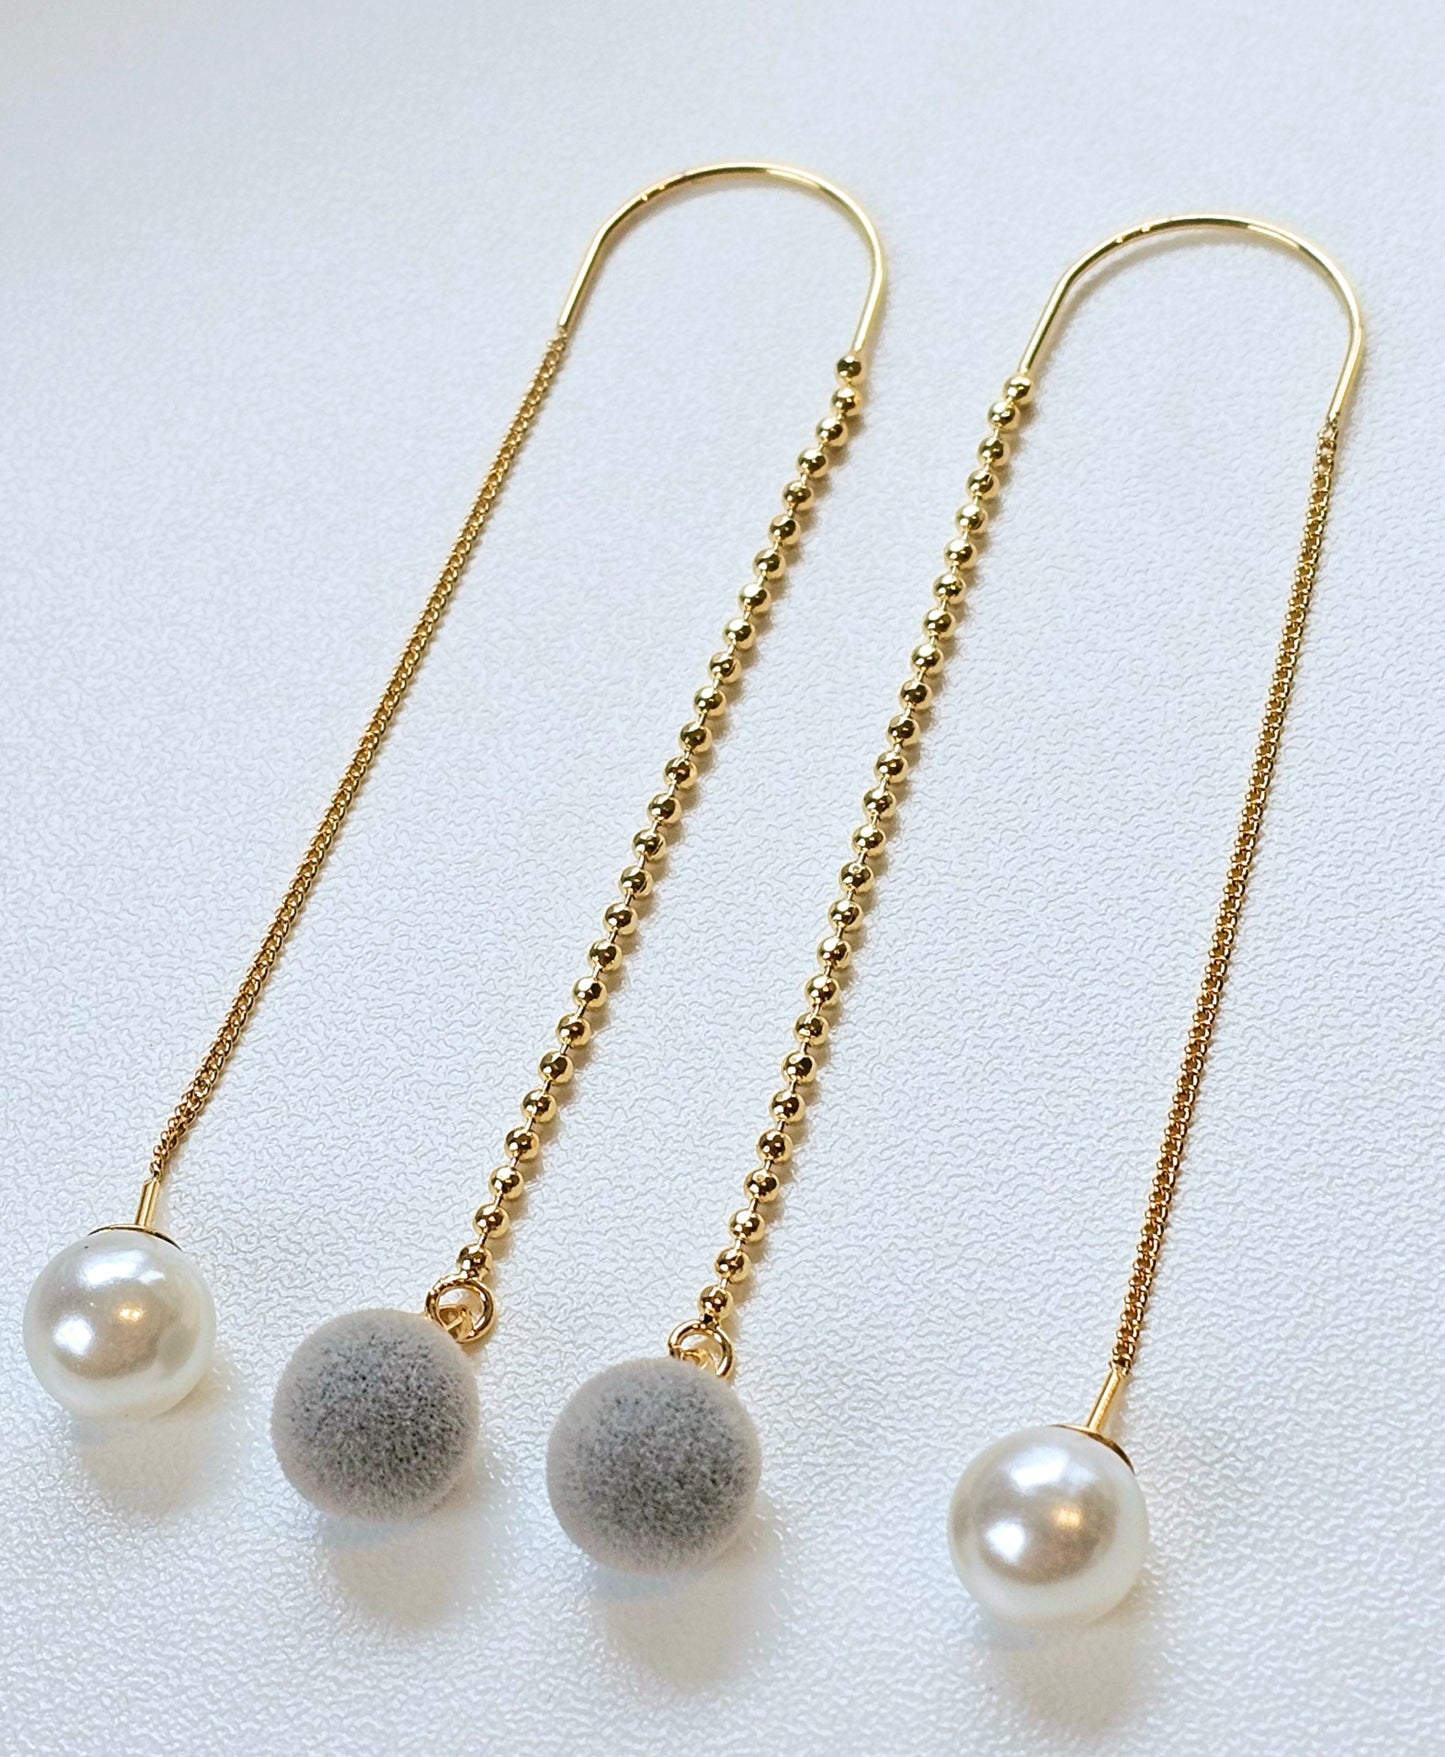 Gold Threader Earrings  - with colored decorative dangles and pearl backings